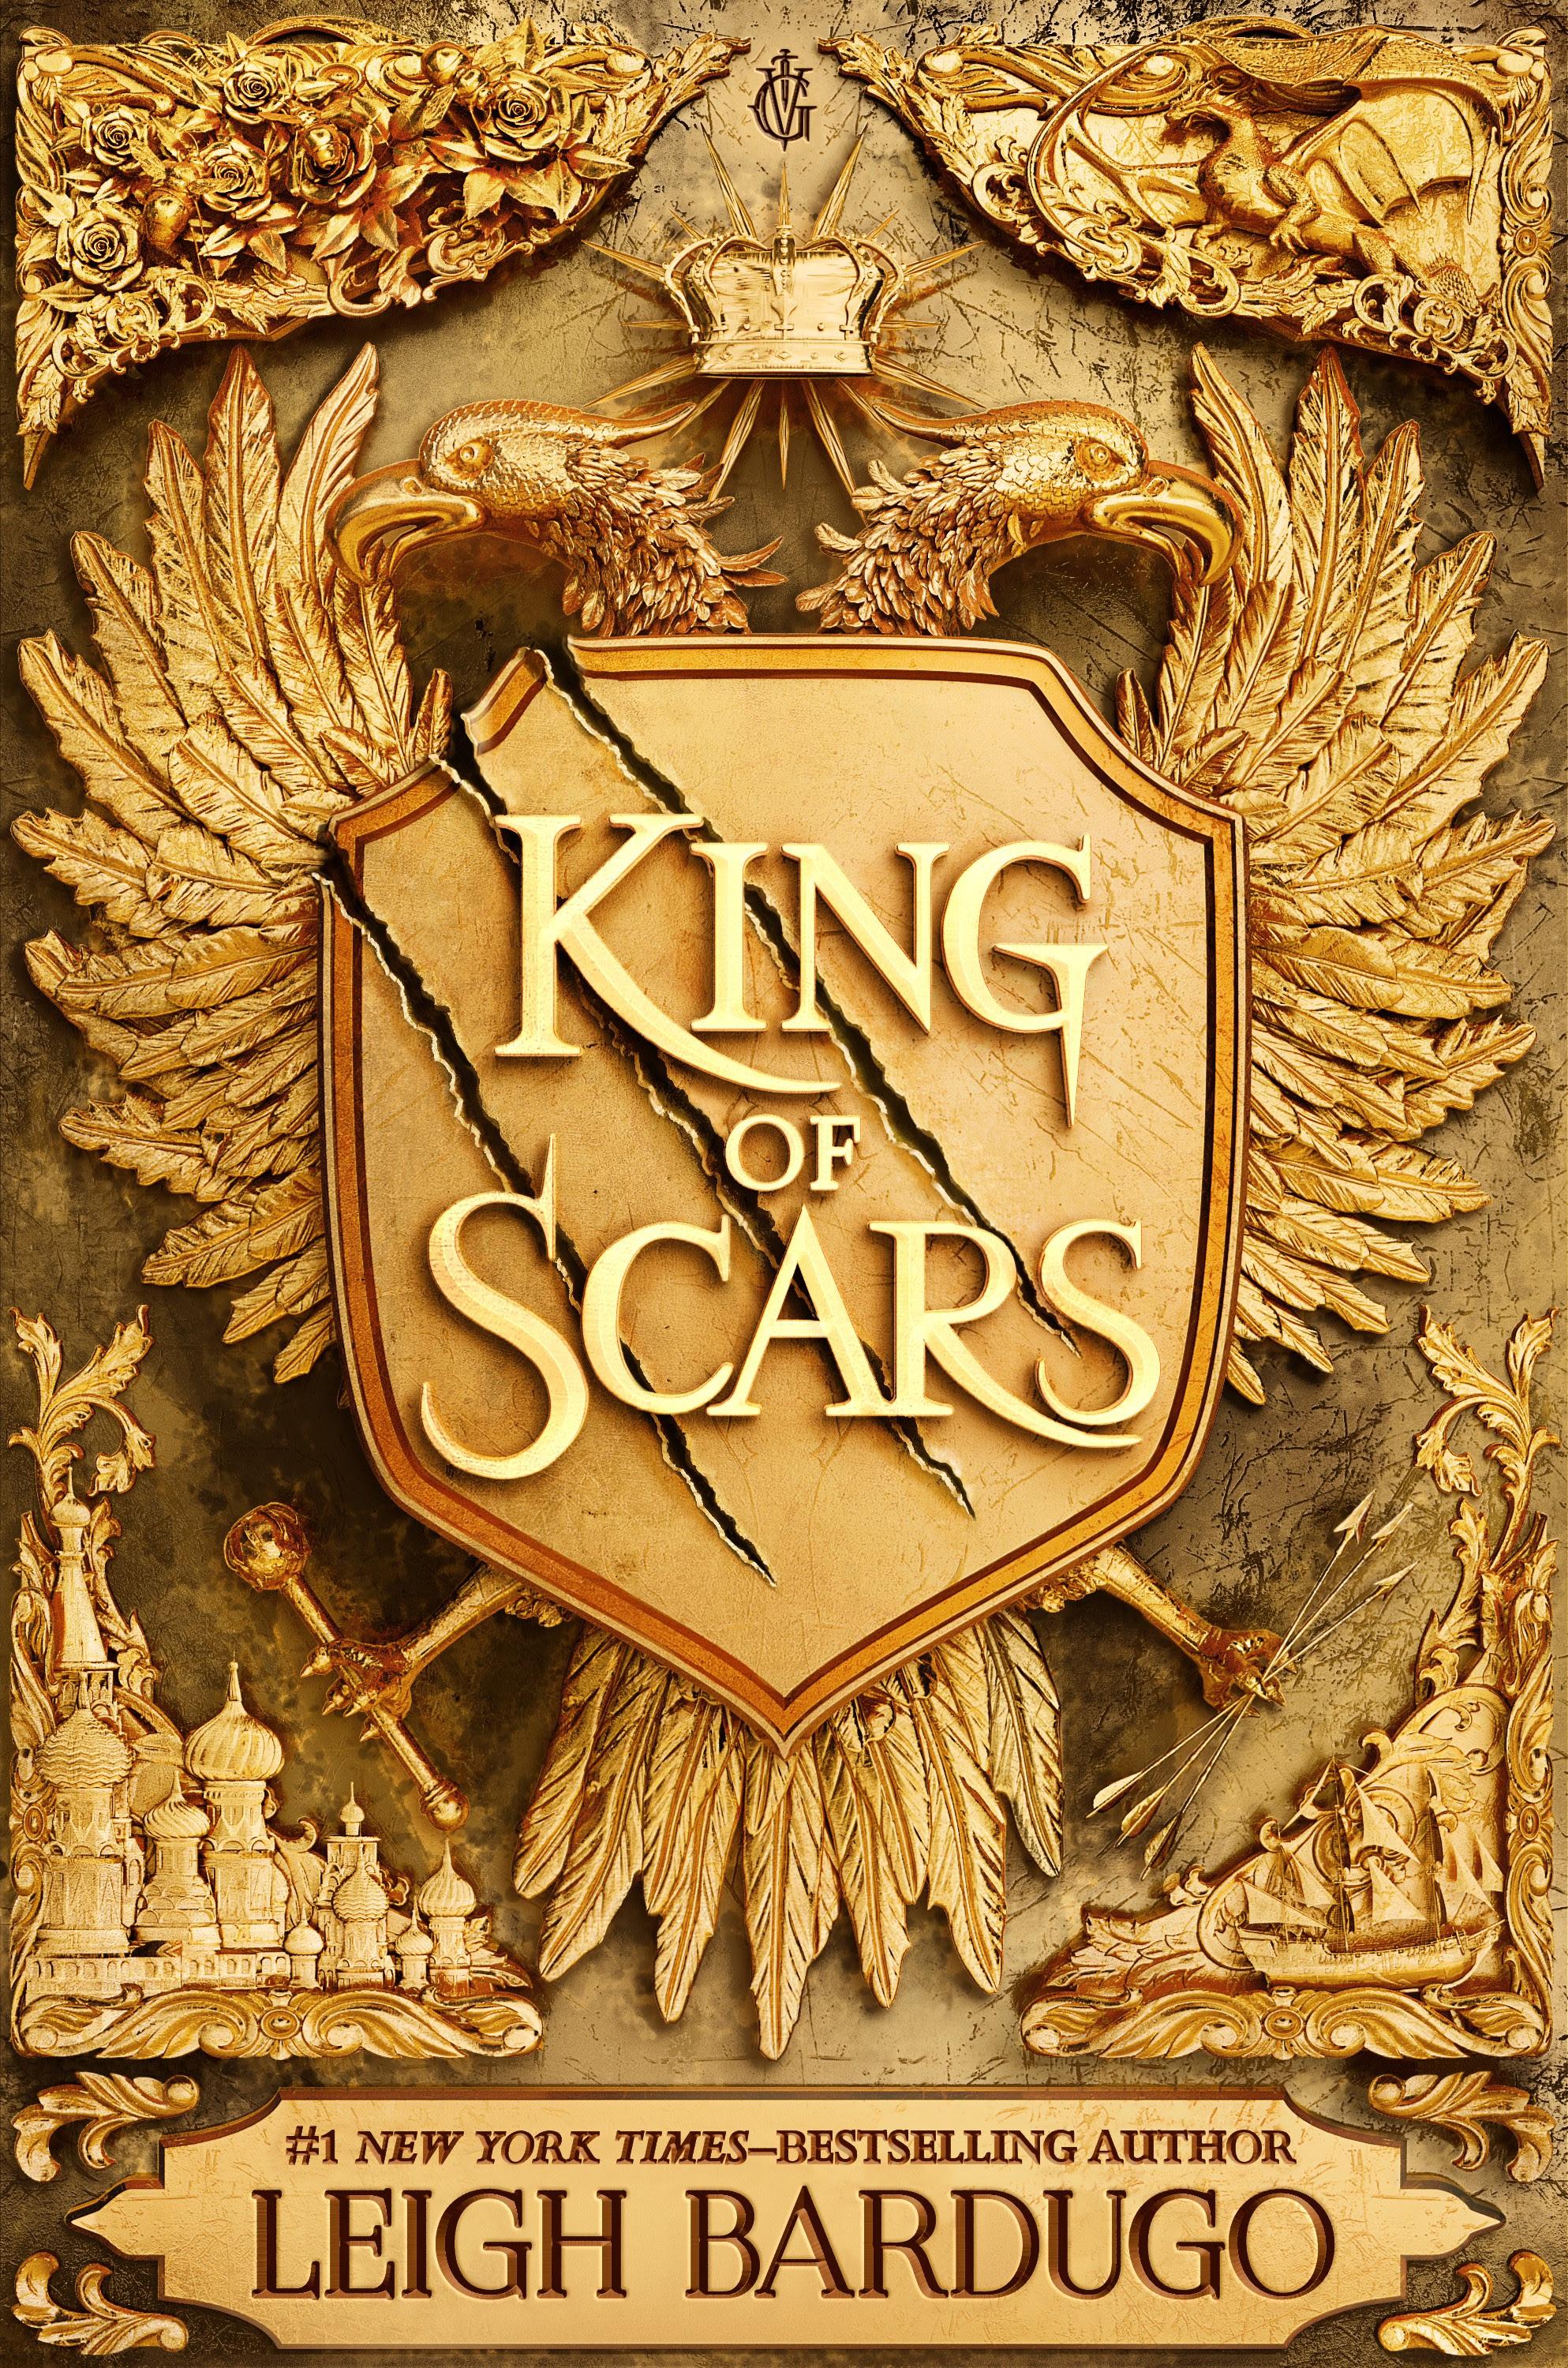 King of Scars (King of Scars, #1) PDF